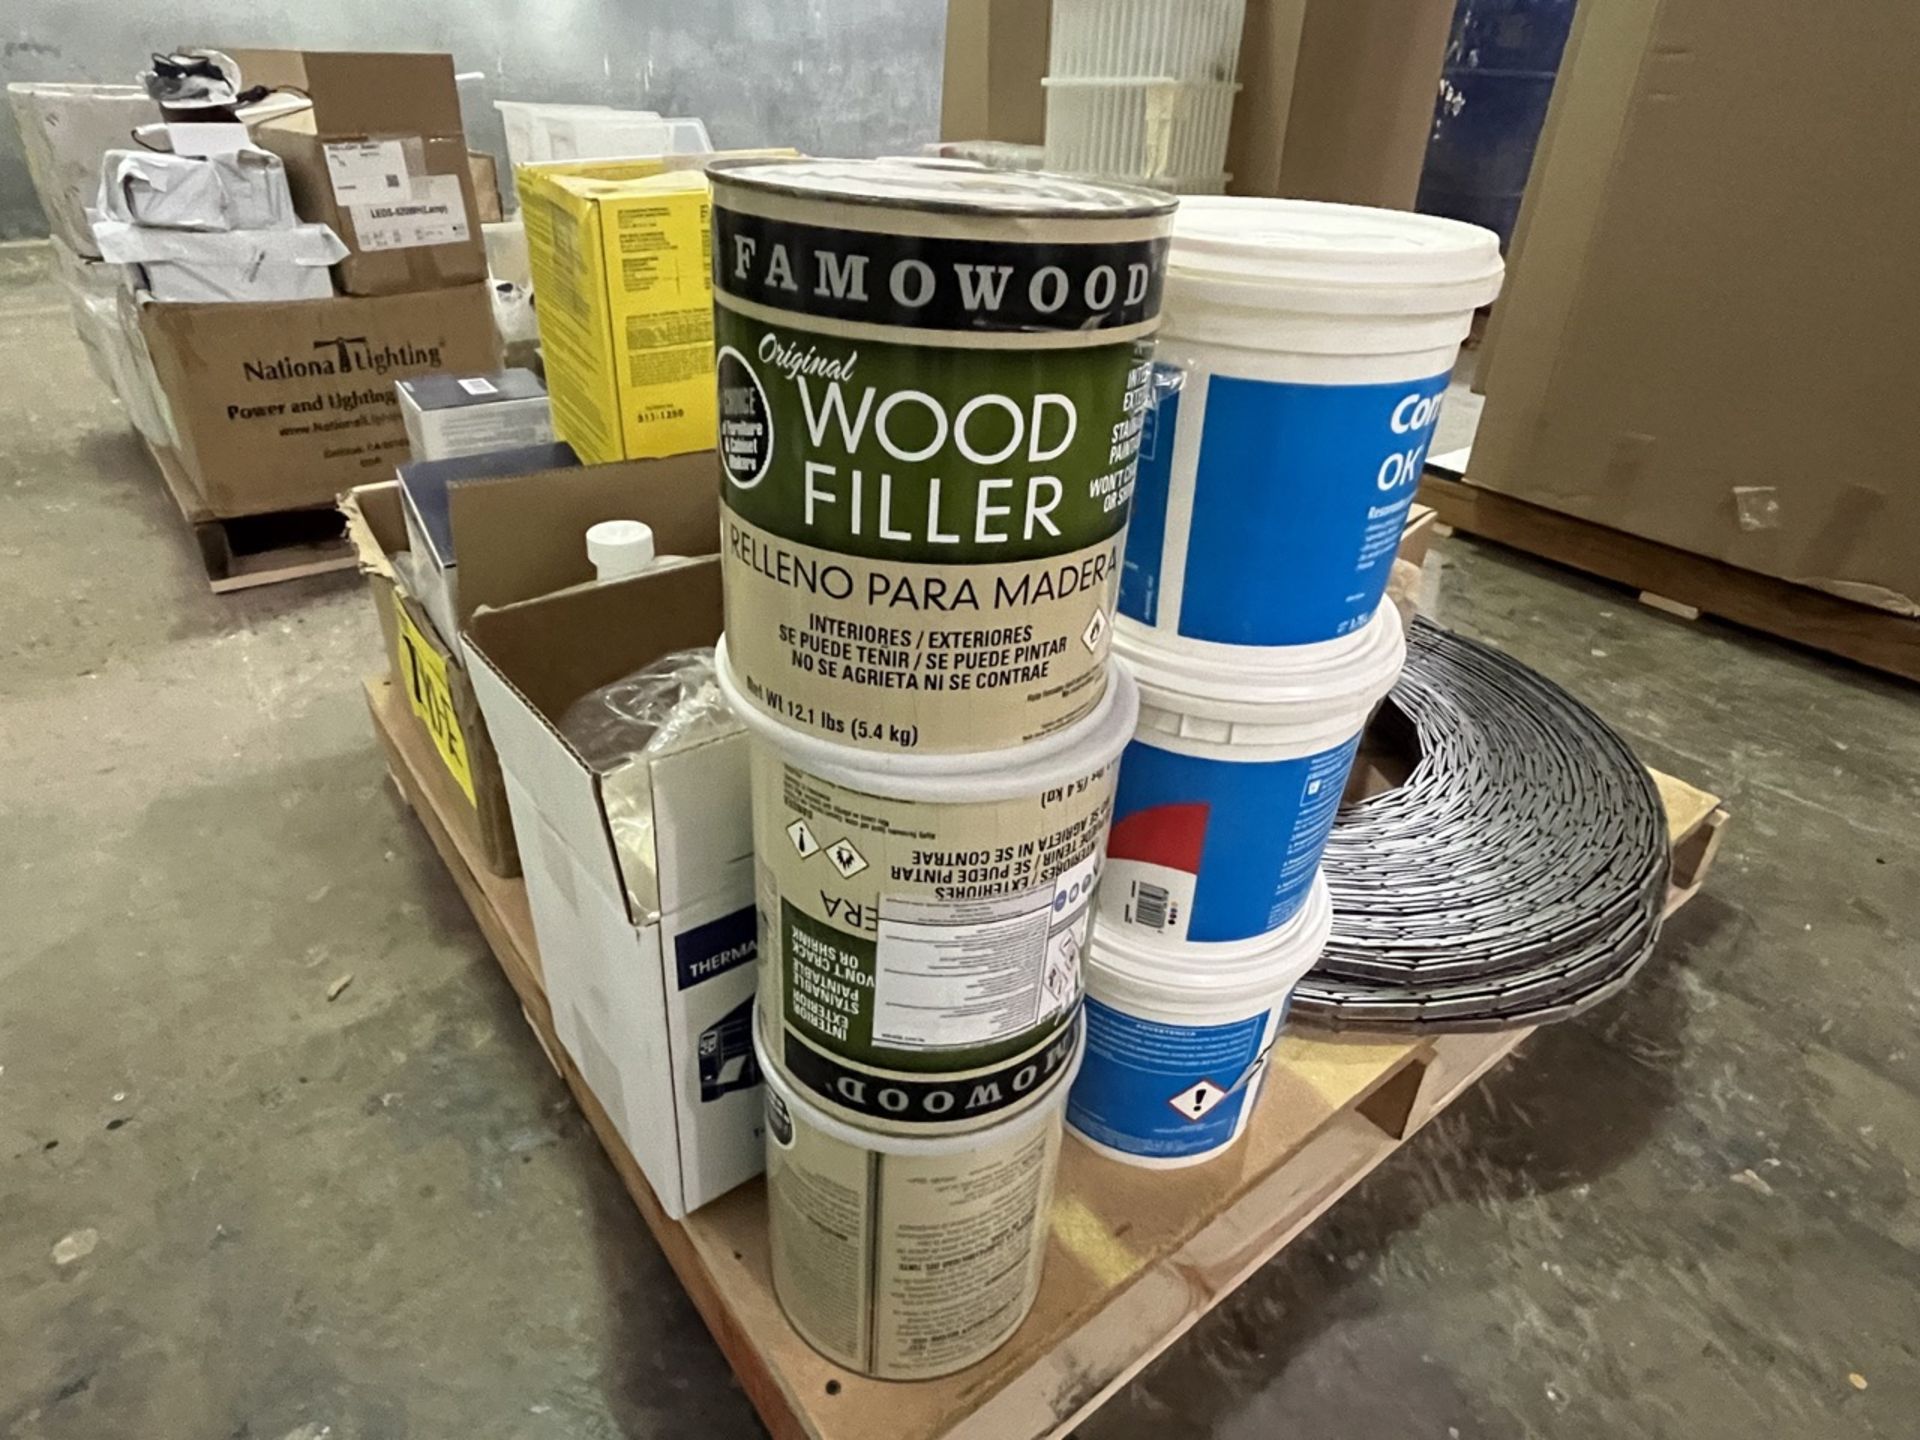 (NEW) Pallet with diverse feedstock contains: 5 gallons of drywall filler, 3 gallons of wood fille - Image 13 of 14